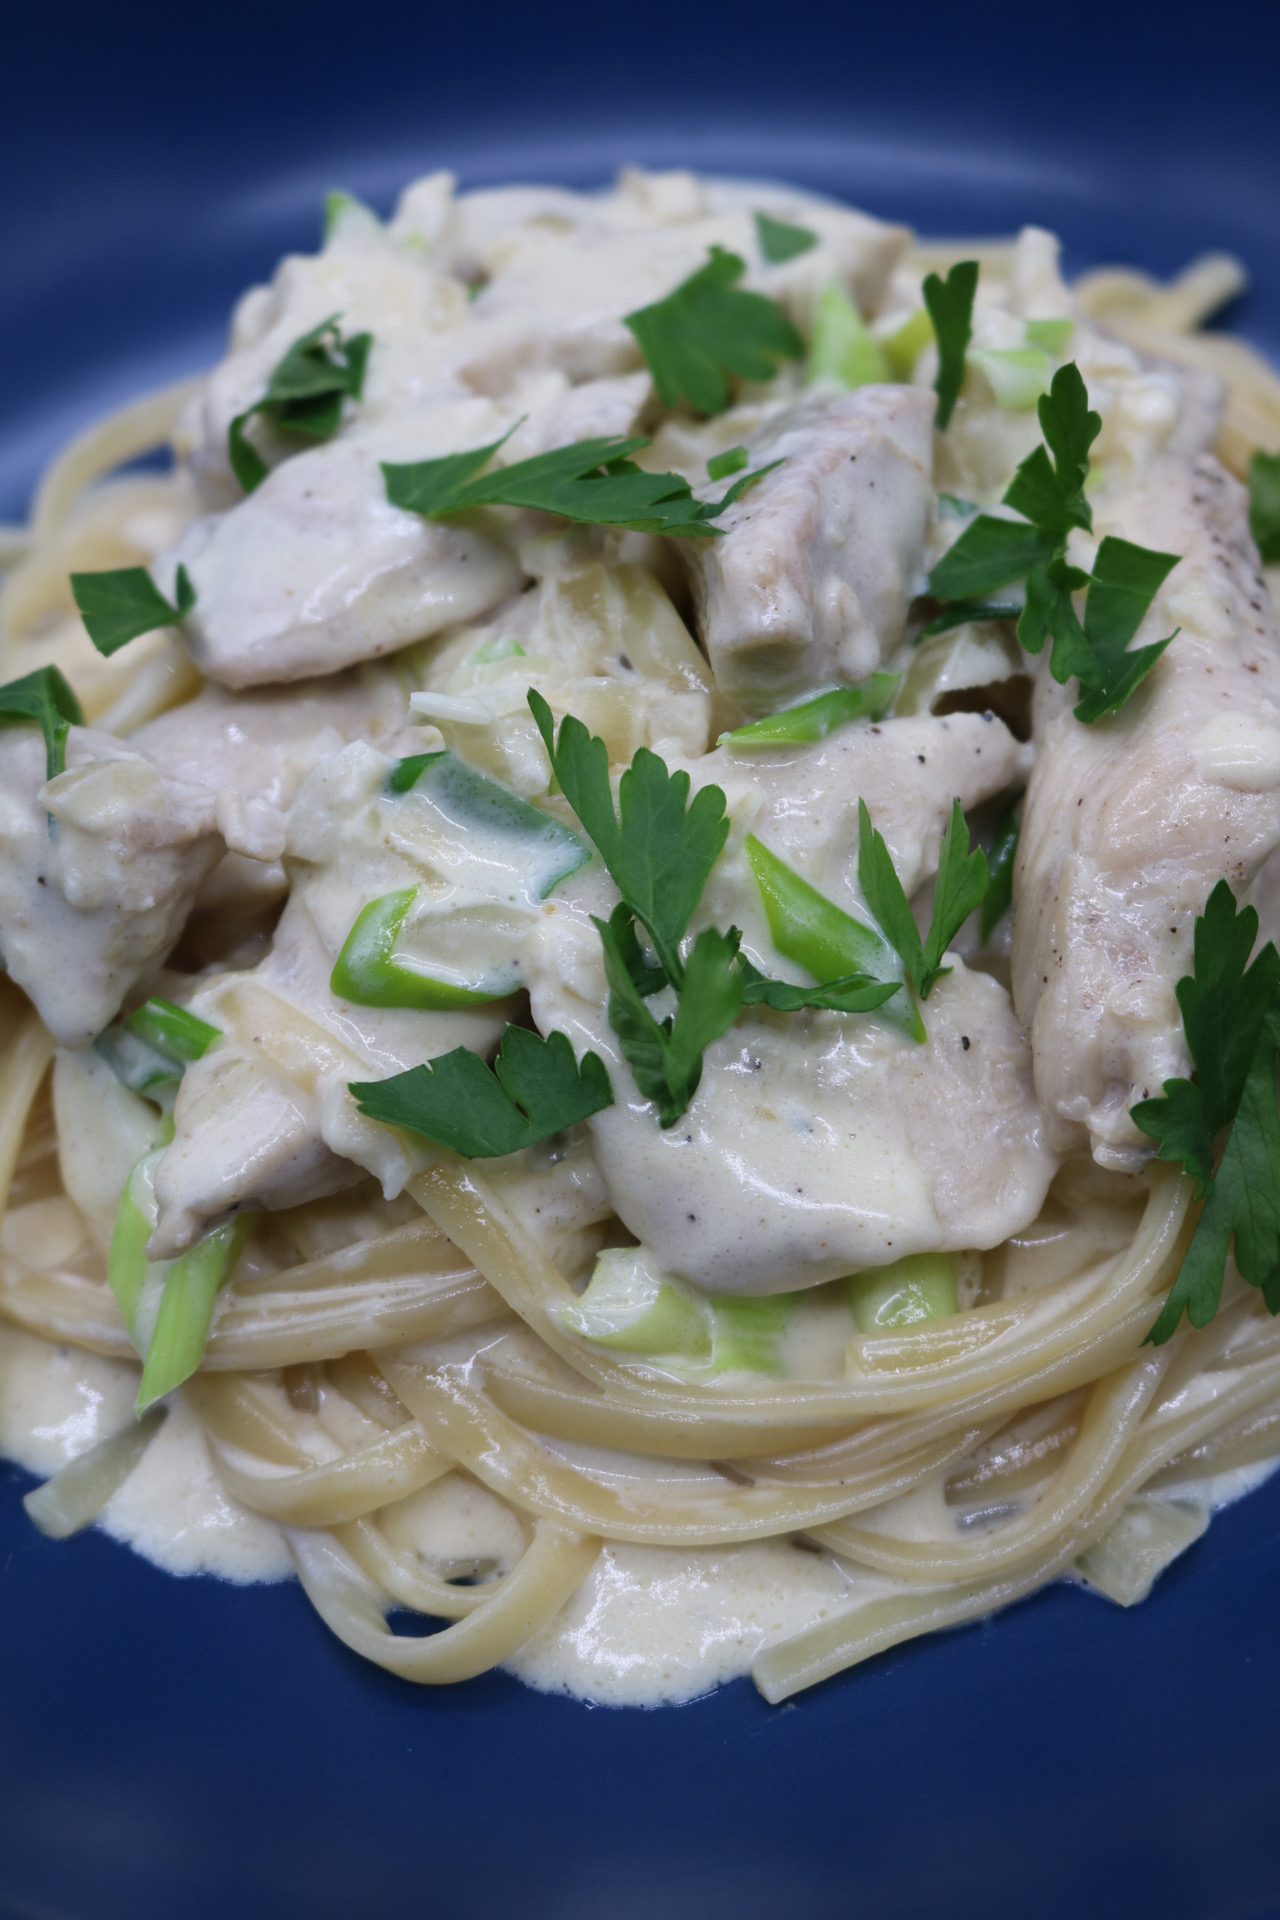 Linguine with Chicken in an Onion Cream Sauce, Linguine with Chicken in an Onion Cream Sauce